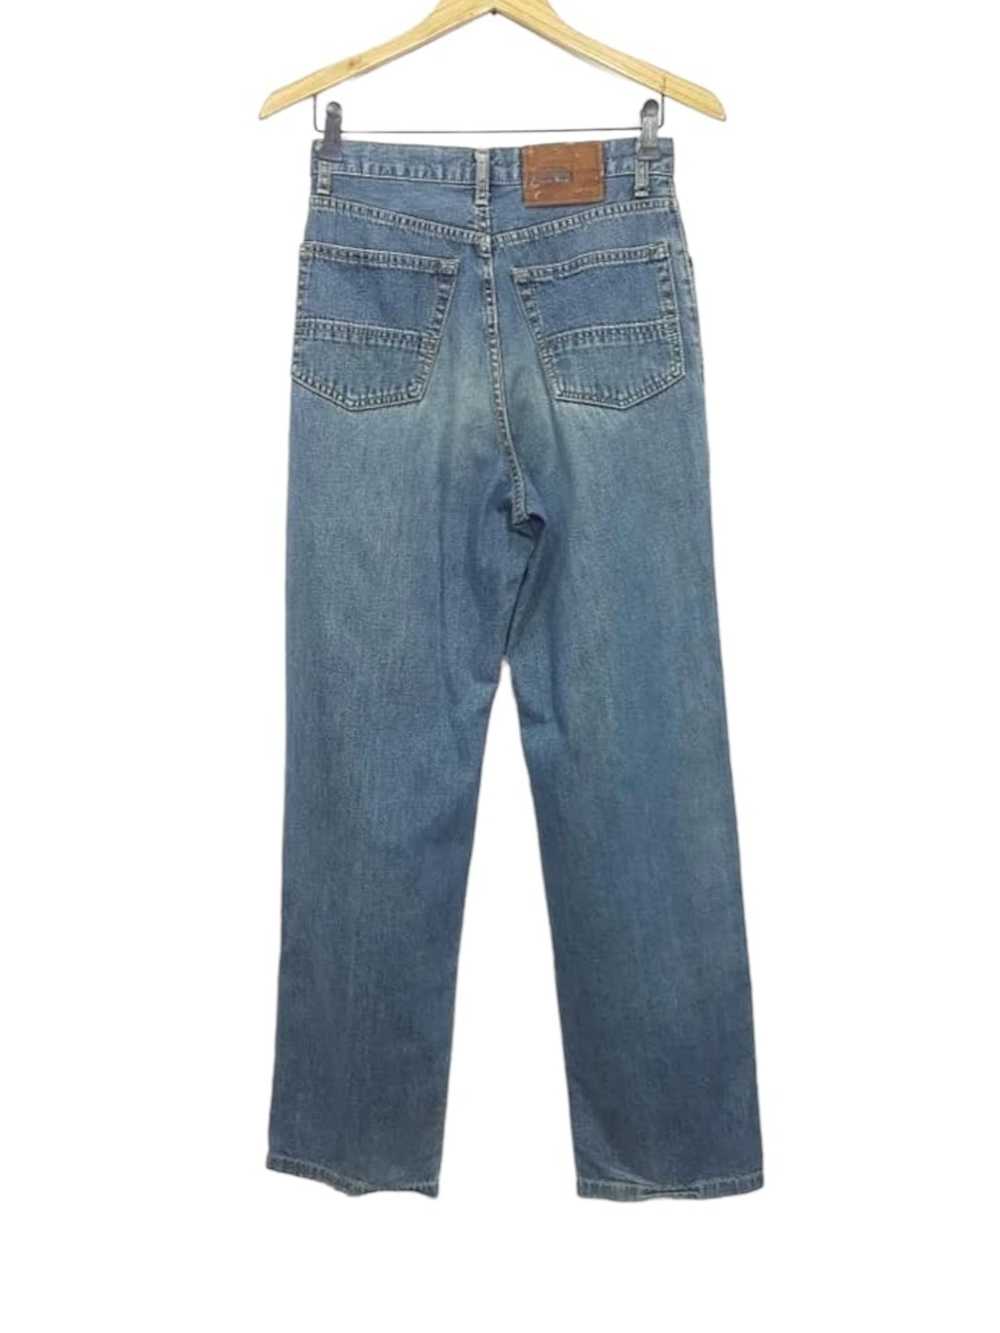 Paul Smith Paul Smith Button Fly Jeans MADE IN JA… - image 2